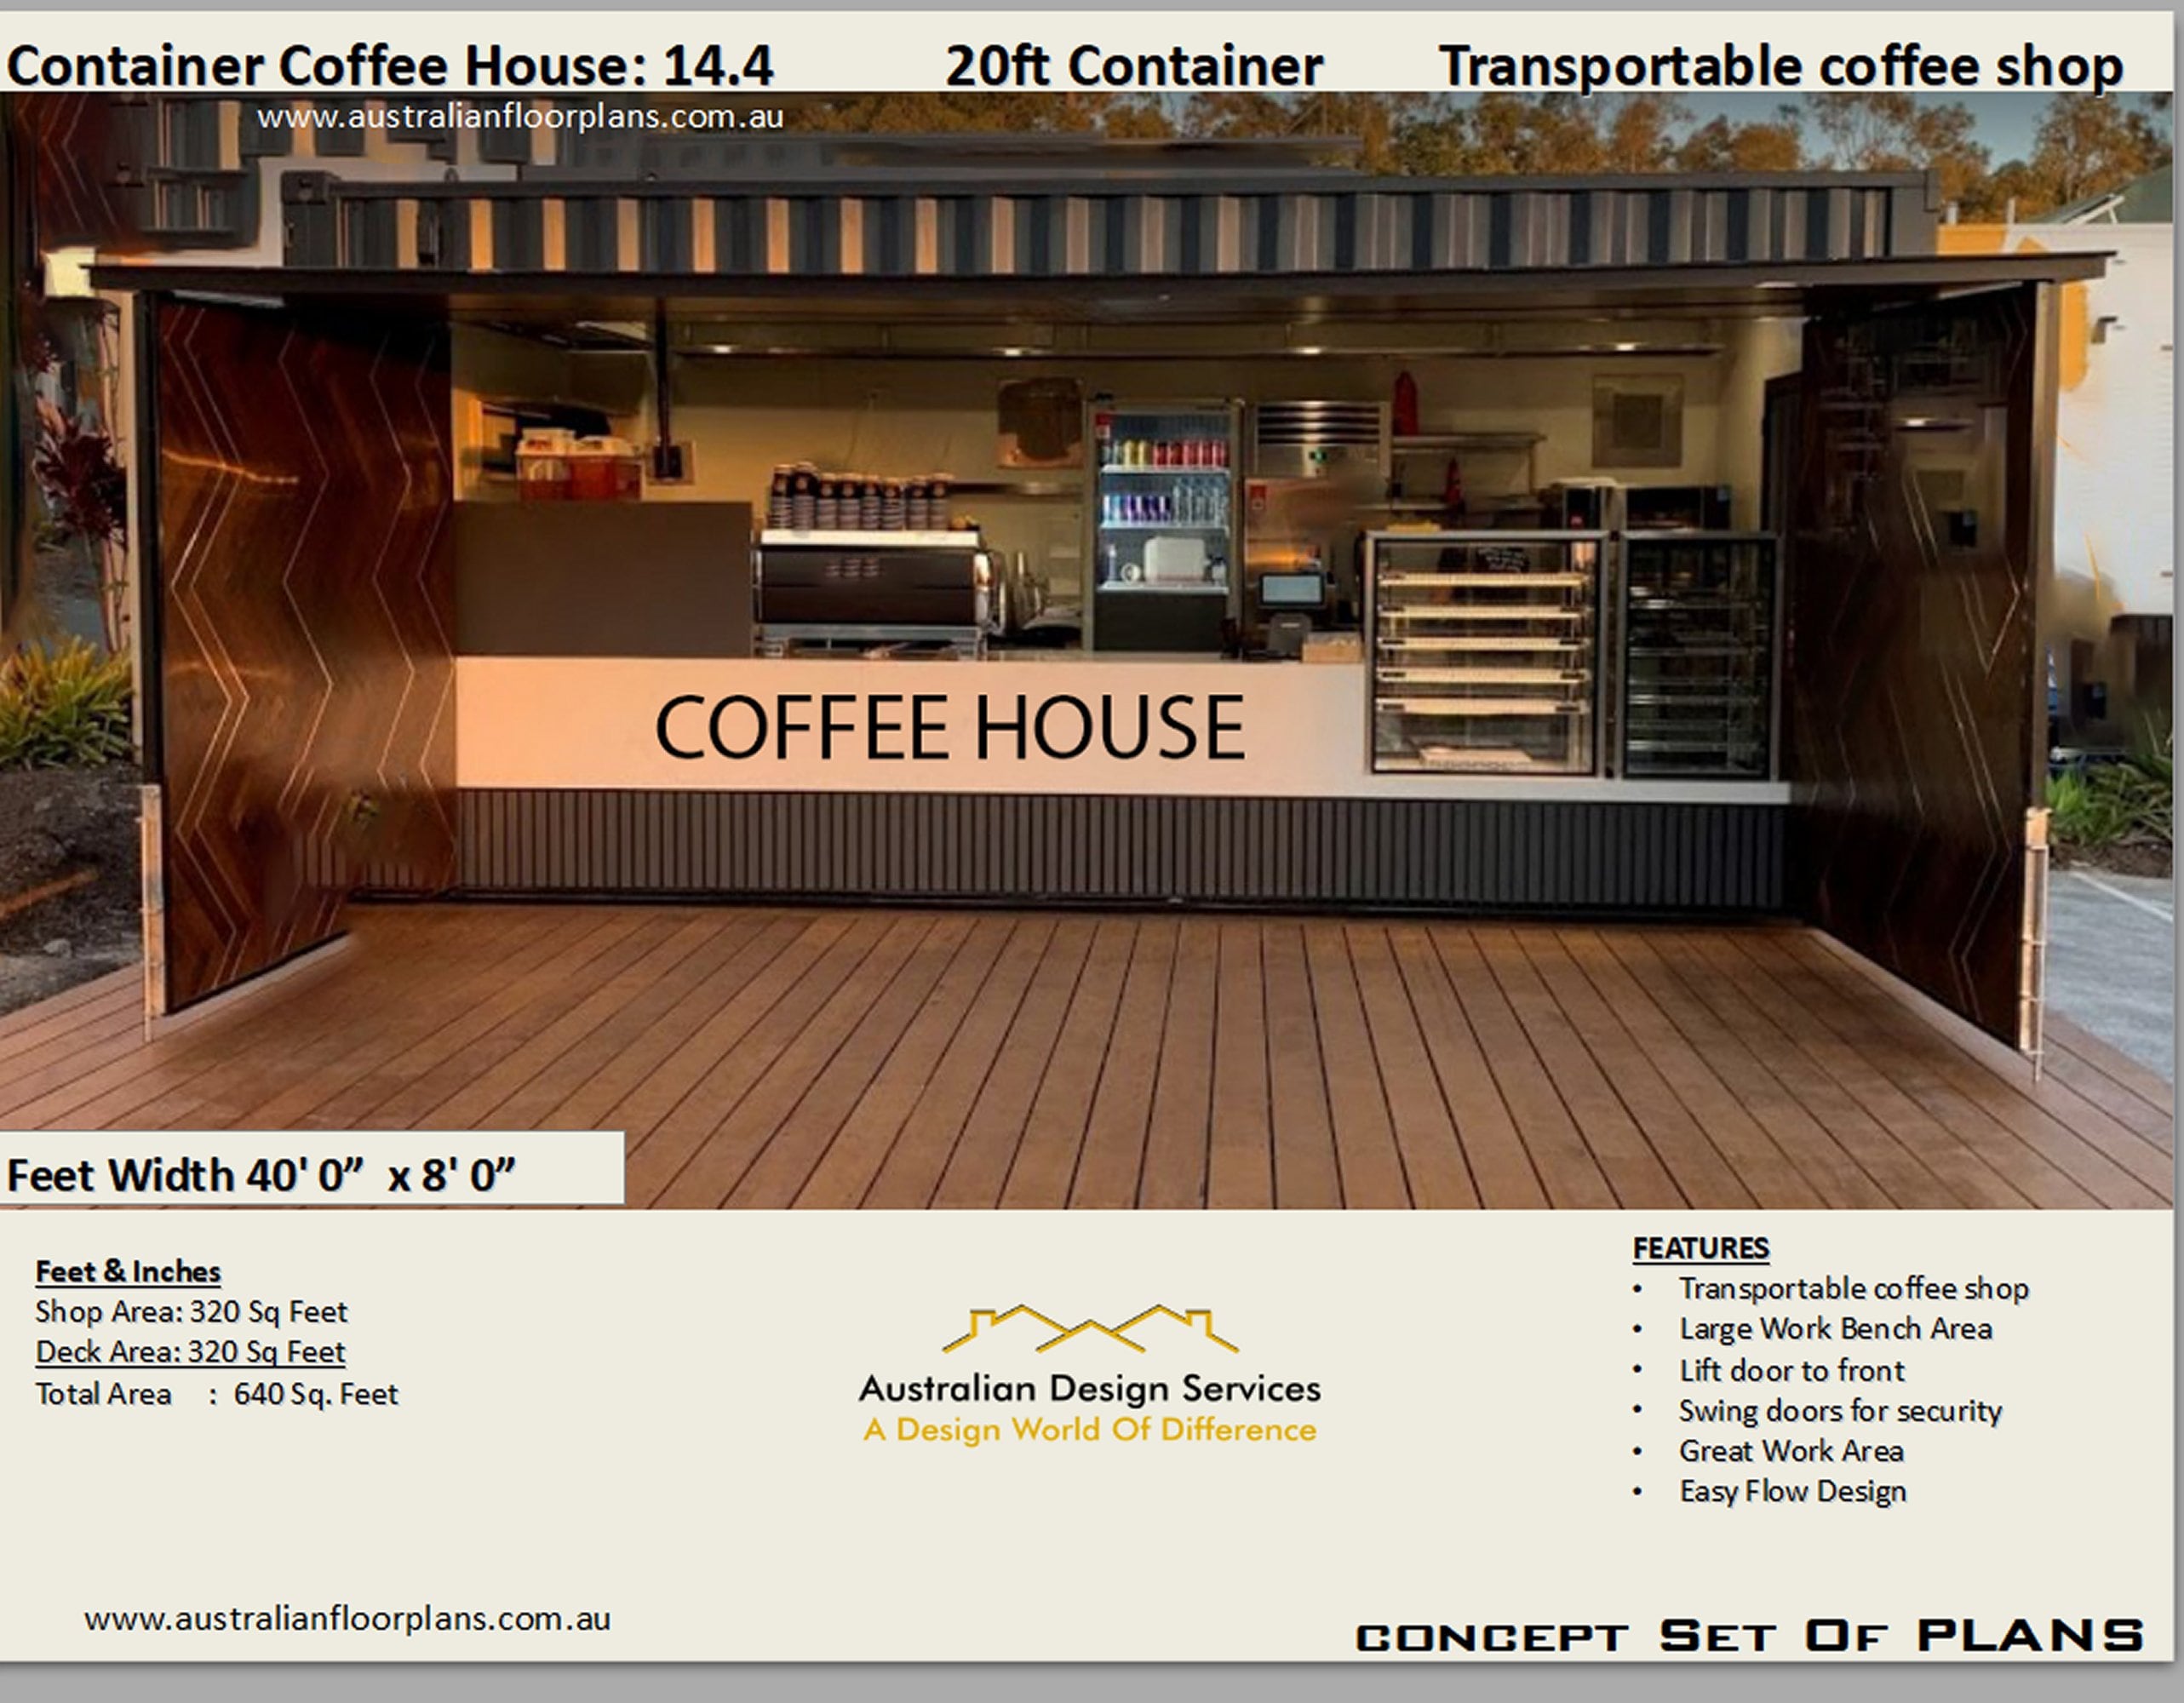 Shipping Container Coffee House Plans Transportable Container Coffee Shop  Container Concept Plans 